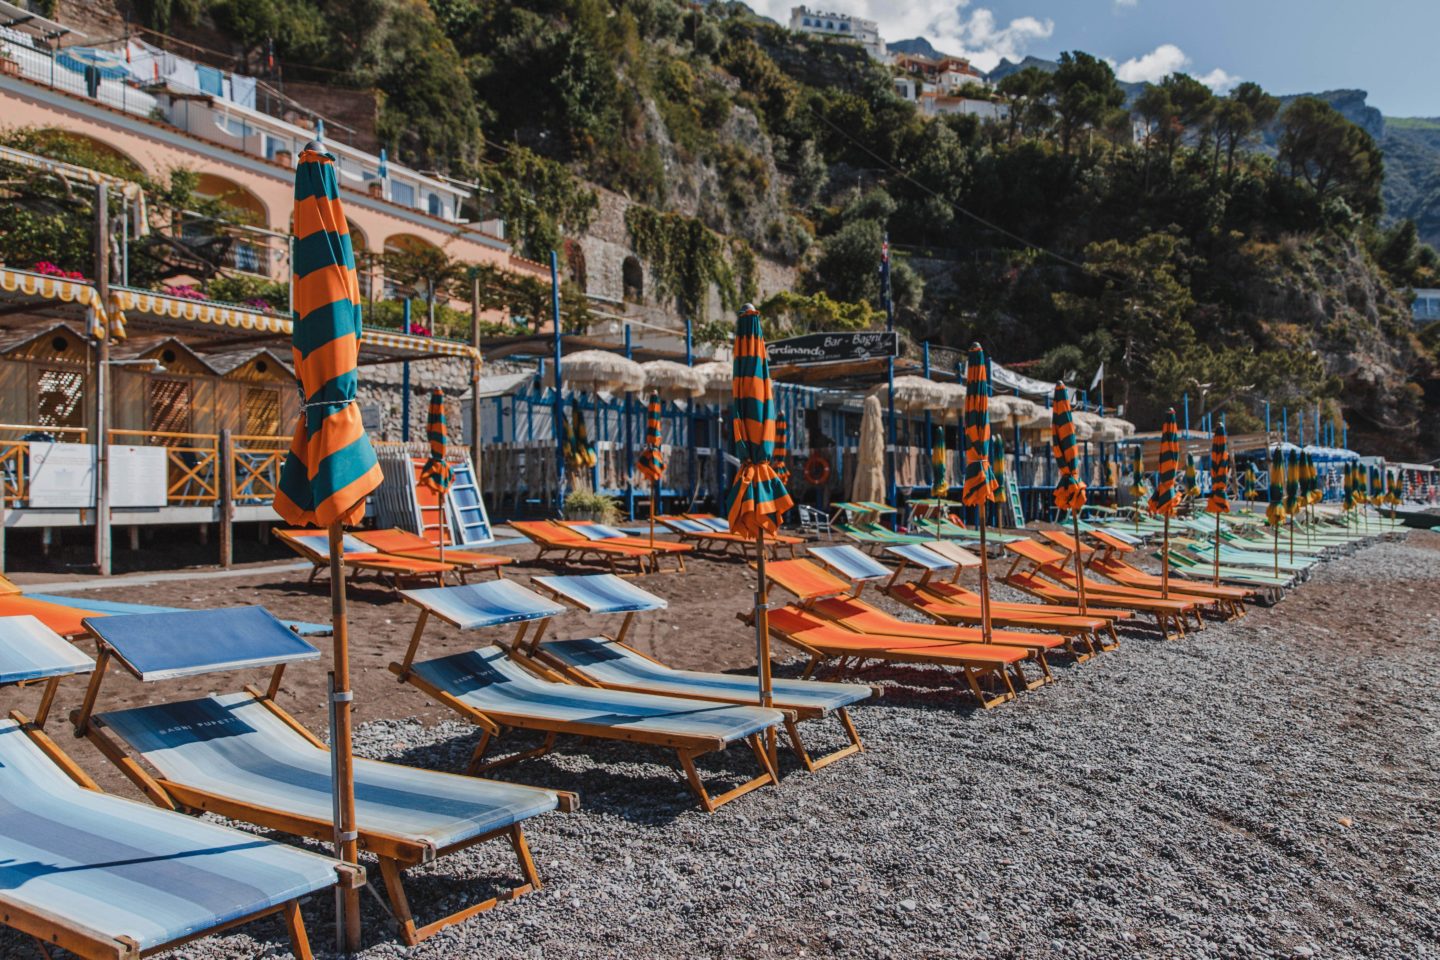 Ultimate 4 Day Positano Italy Travel Itinerary | What to See & Where to Eat: Fornillo Beach Positano